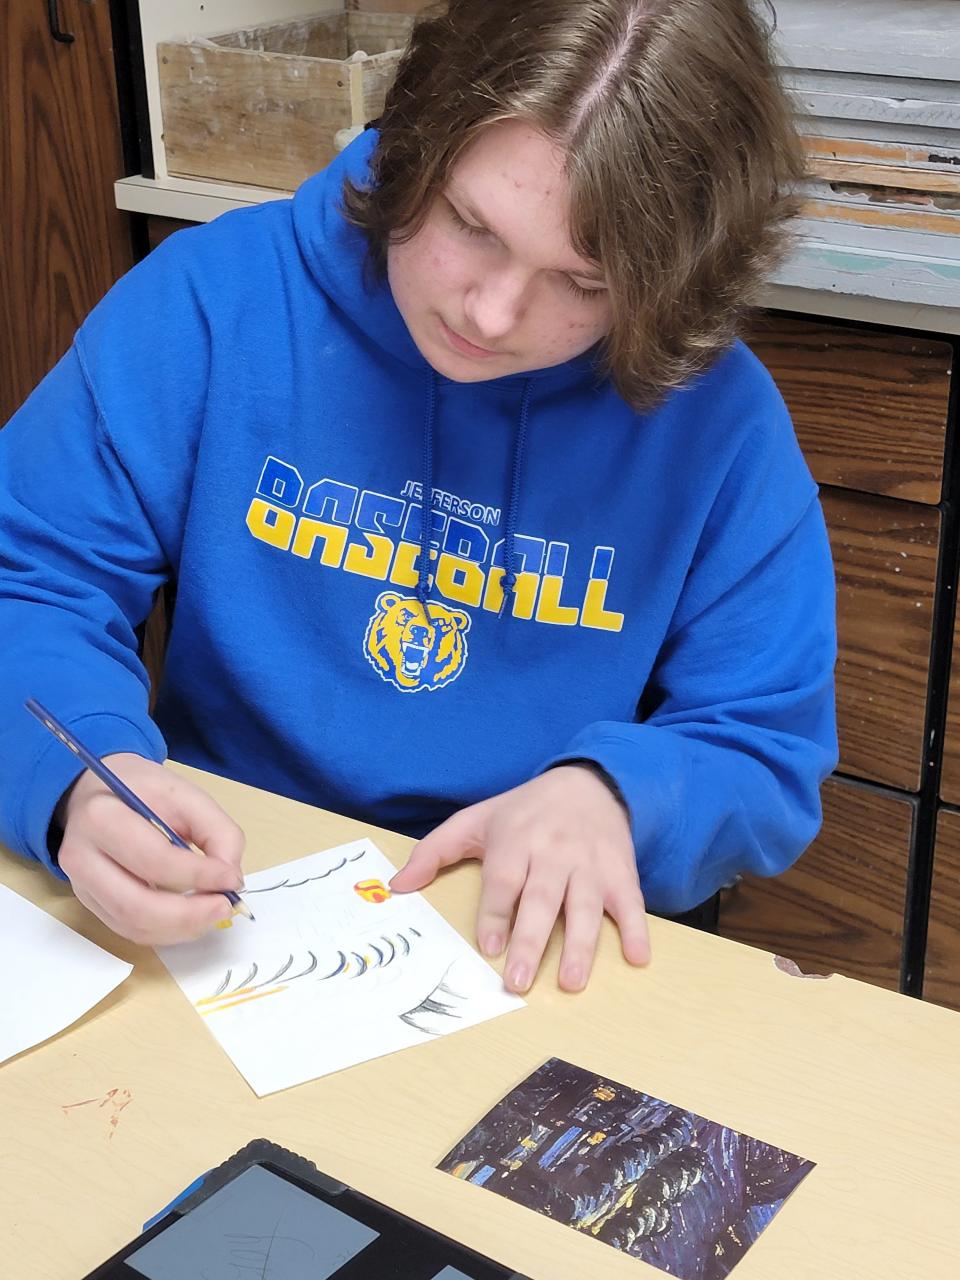 Jefferson High School student Parker Pauwels uses a colored pencil to create a panel for a mixed media art project.